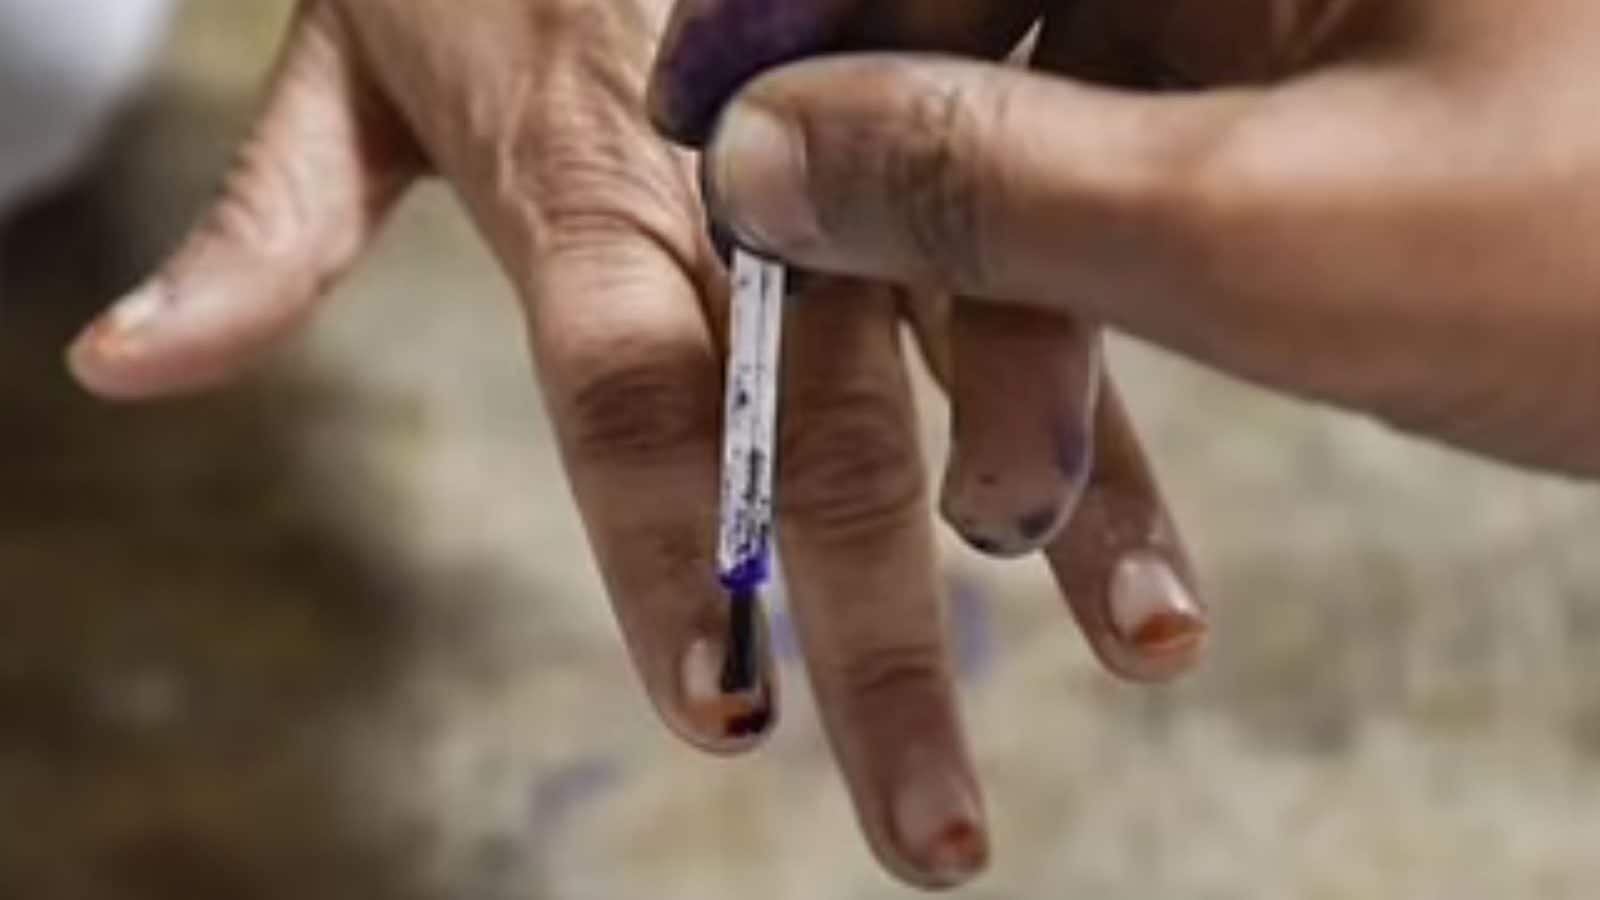 Bihar Bypoll: EC Bans Opinion, Exit Polls in 48-Hour Period Before Voting